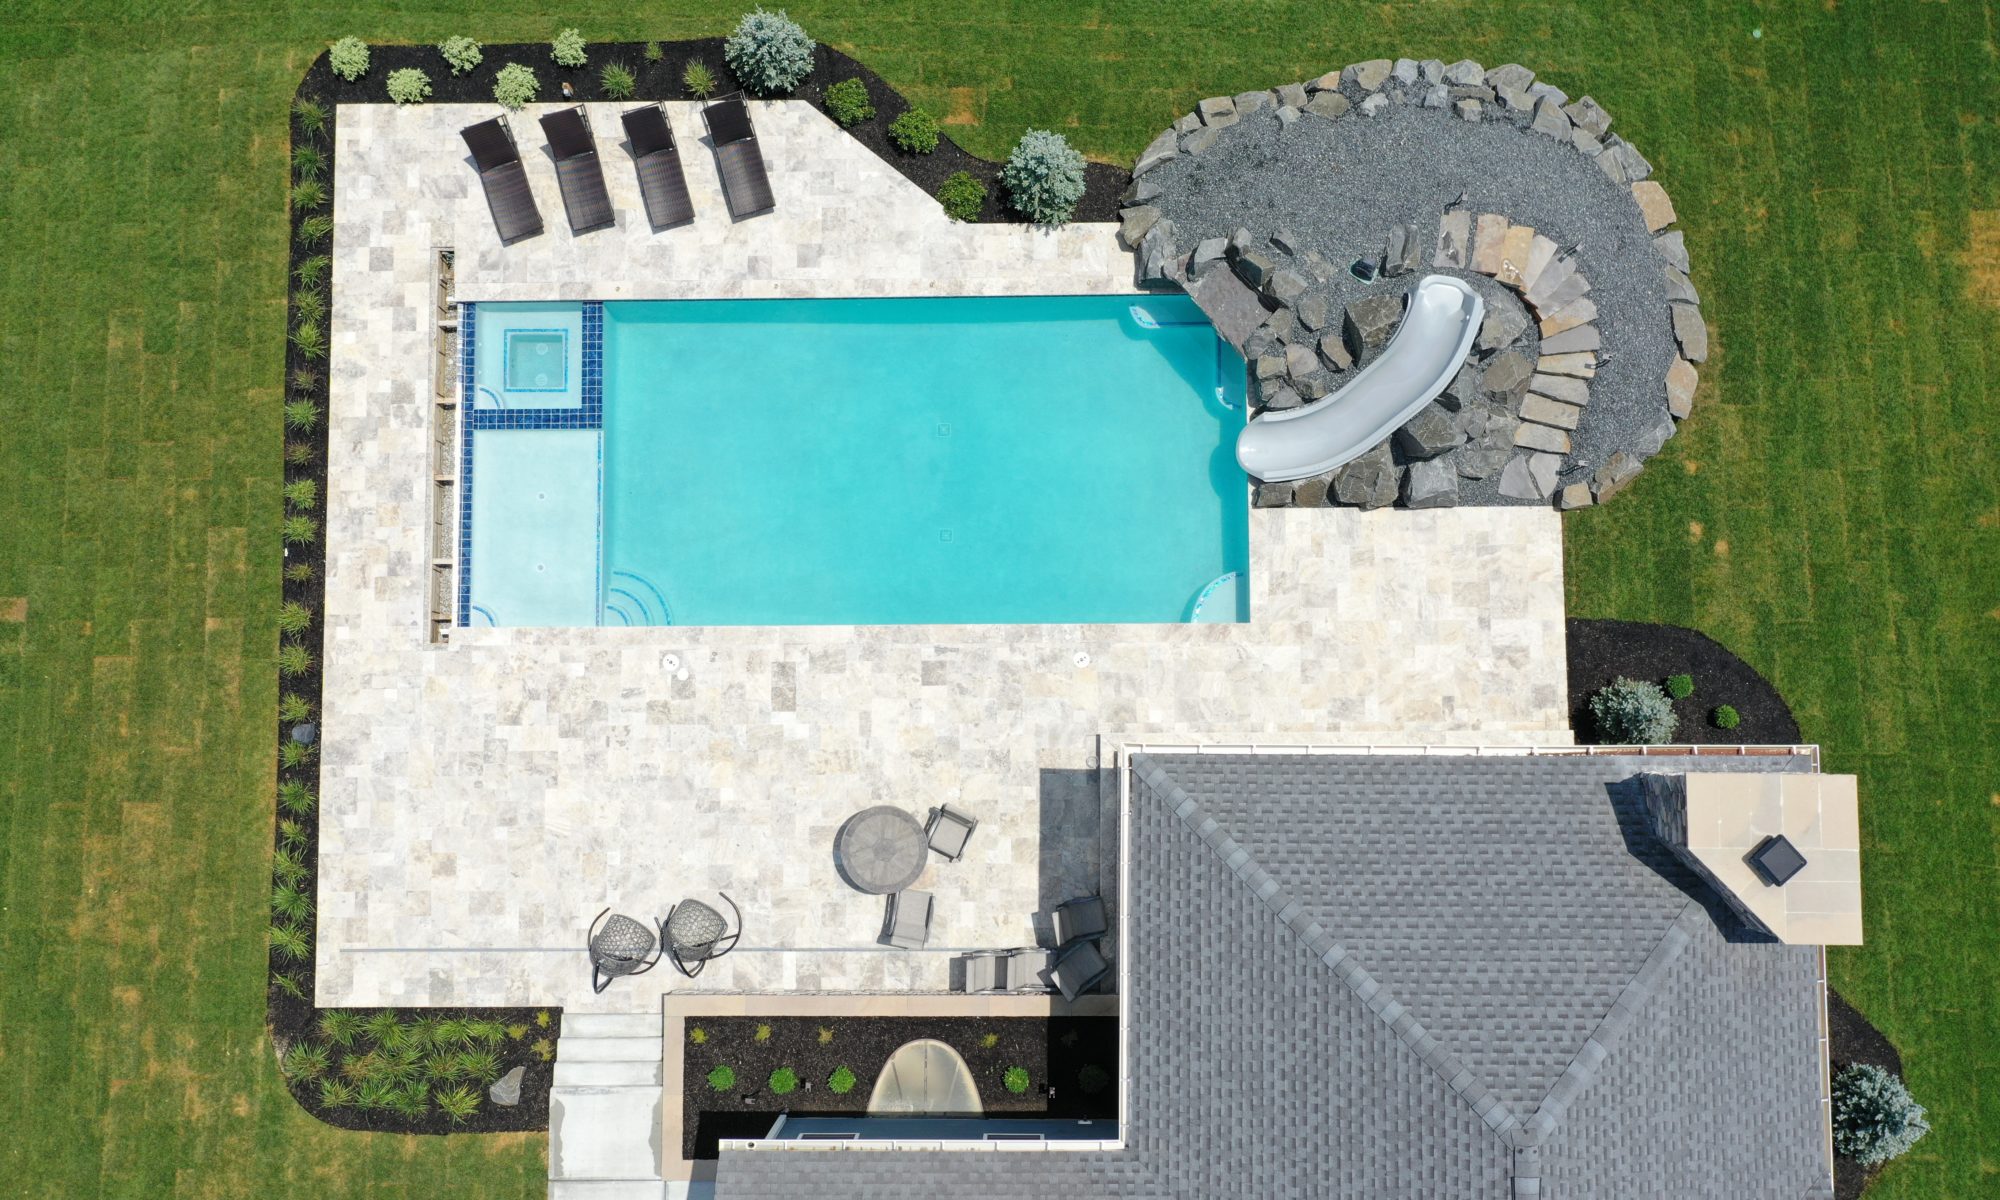 poolside pavillion paver patio pool fire fireplace stairs cover gray grey tanning deck graven plants trees flowers black